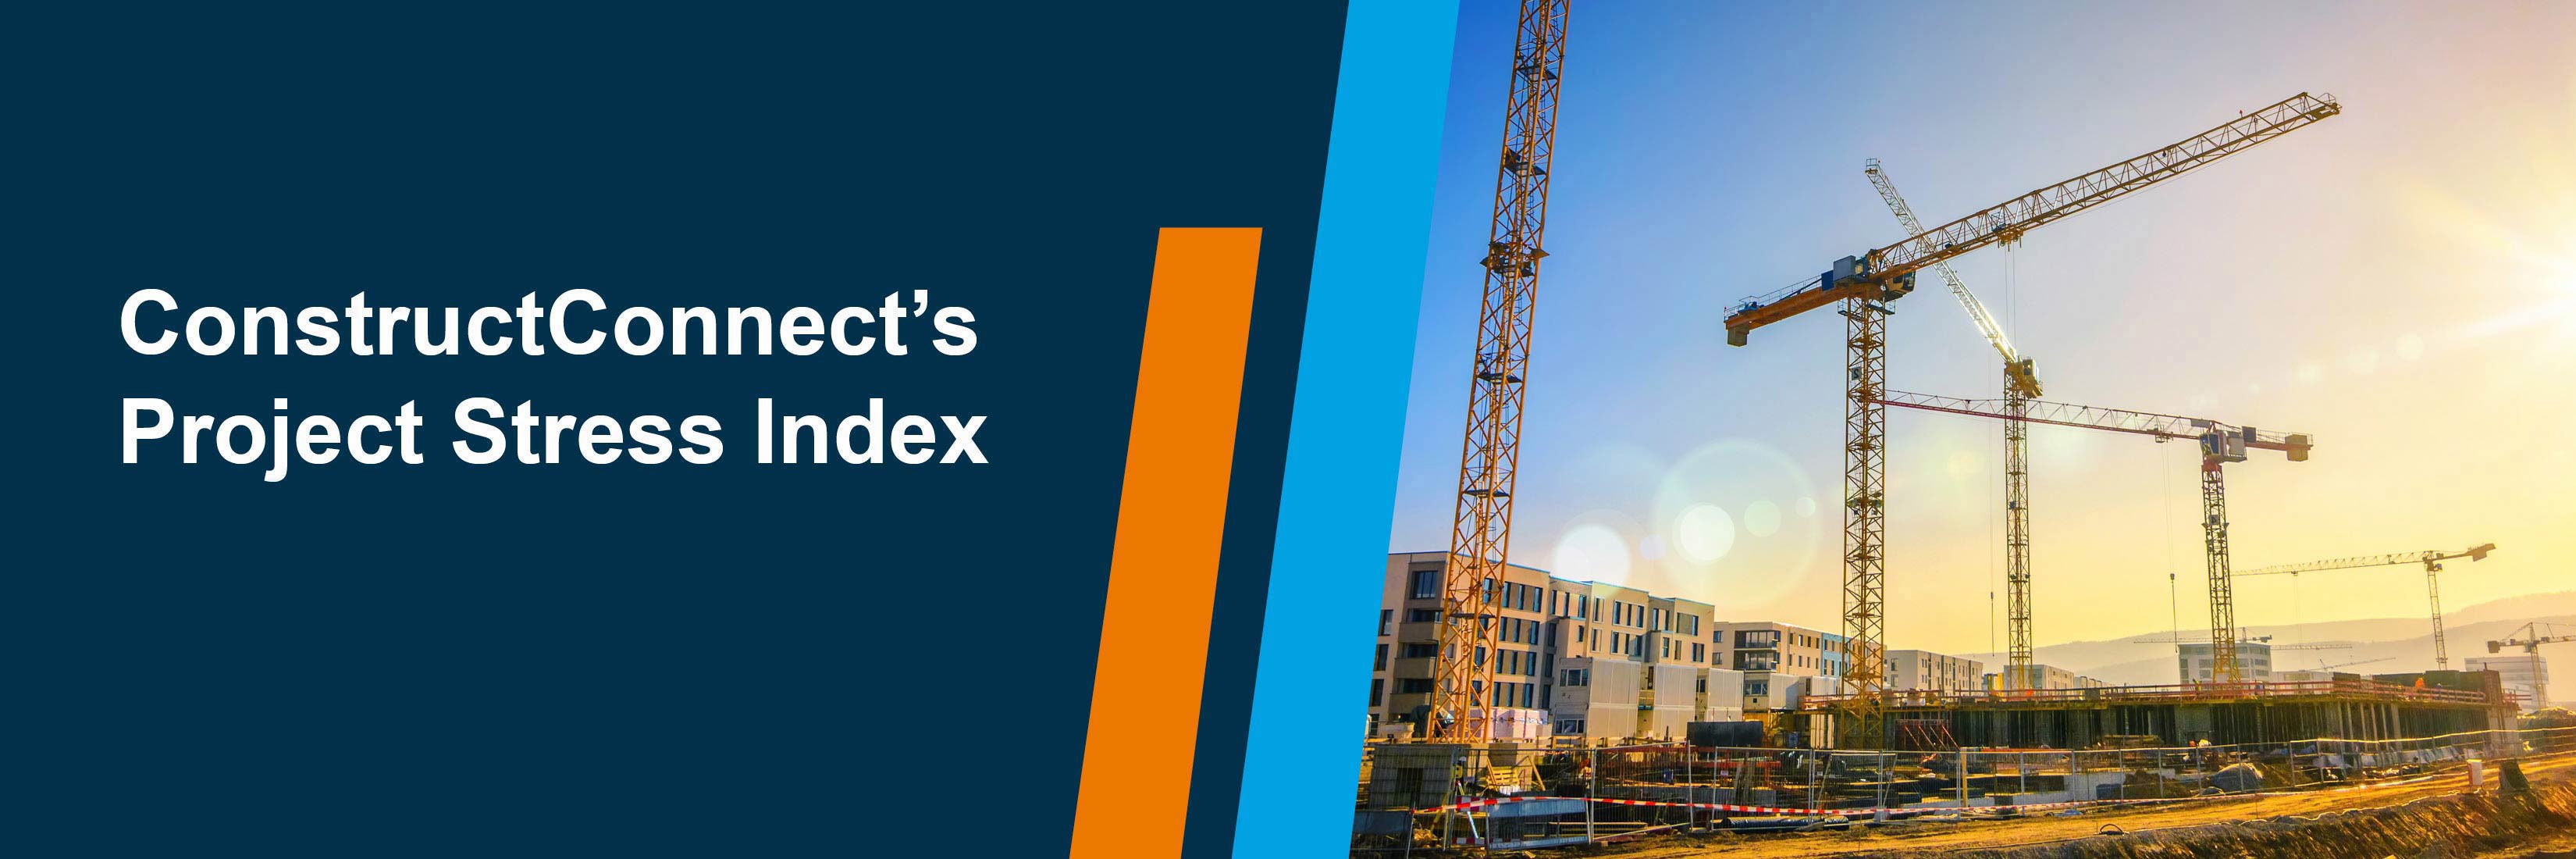 ConstructConnect's Project Stress Index - March 18